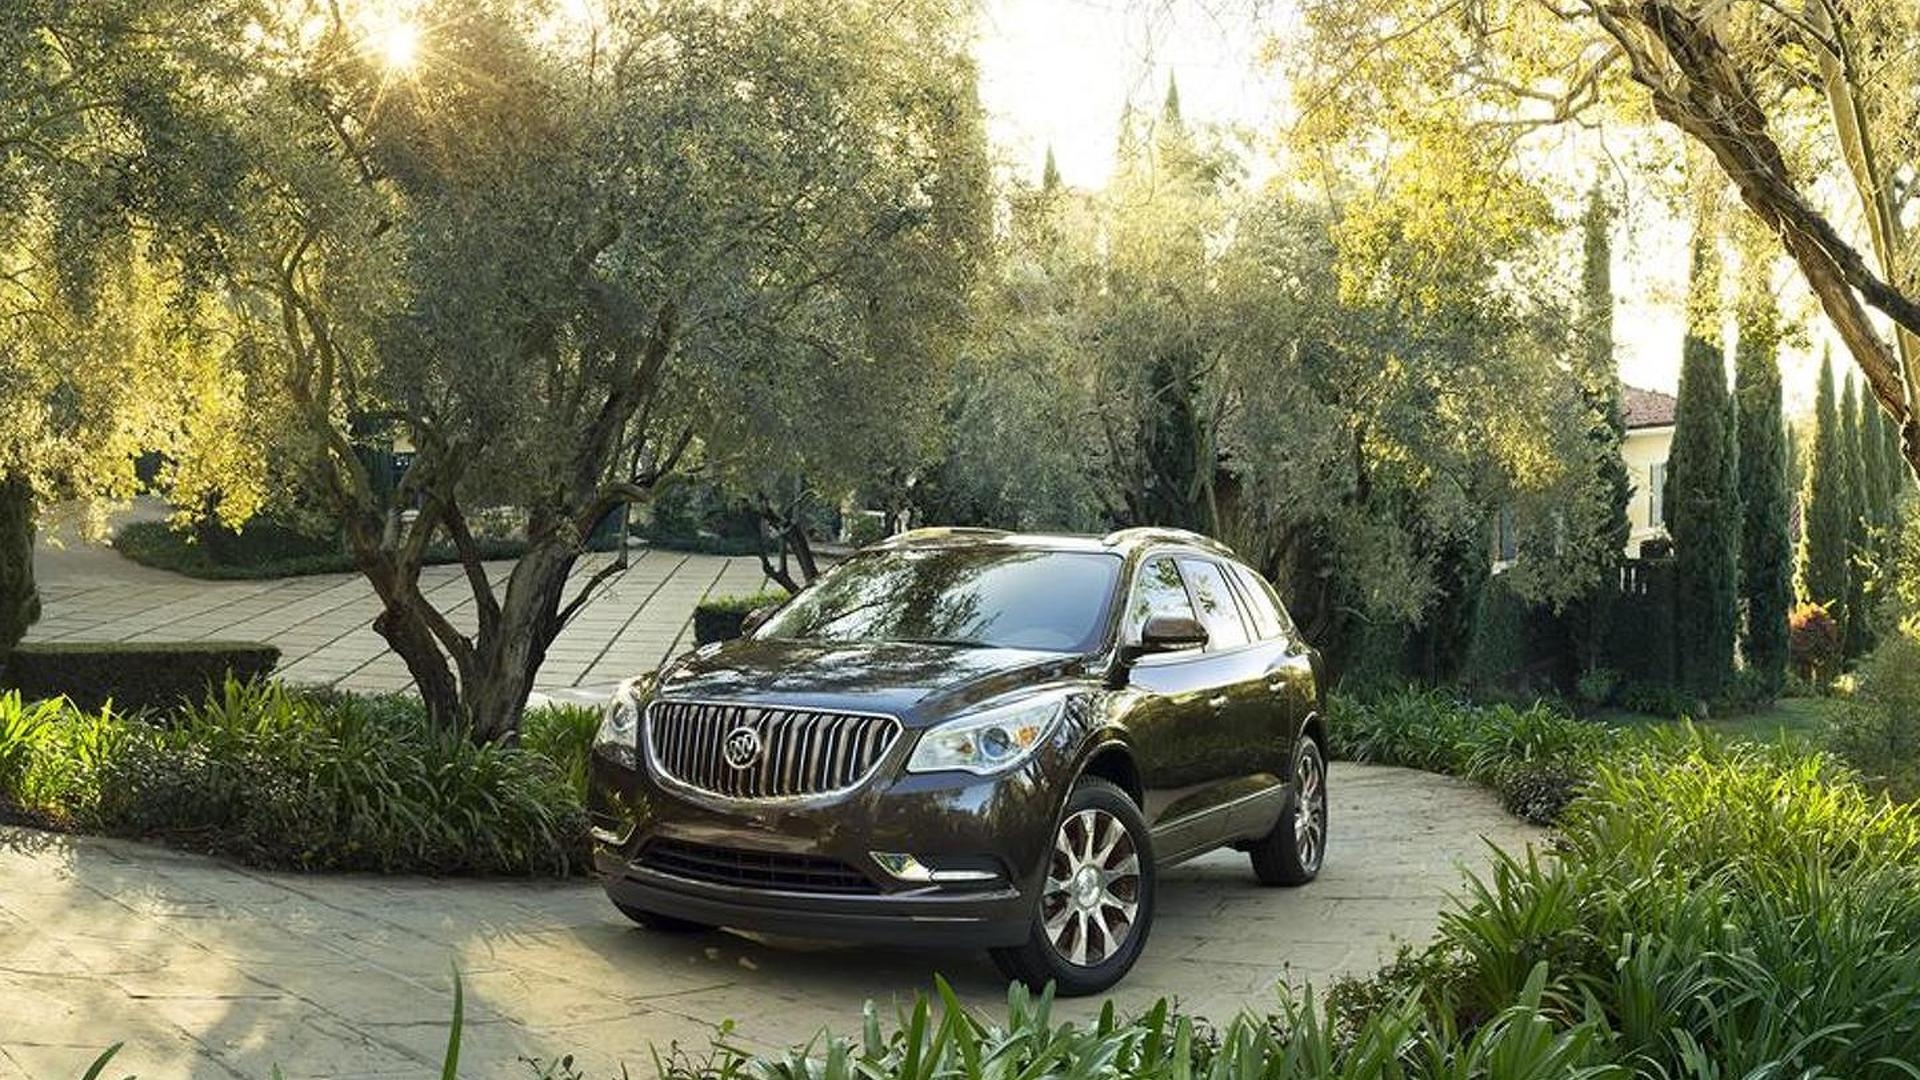 Buick Enclave, Auto, 2016, Tuscan Edition, 1920x1080 Full HD Desktop